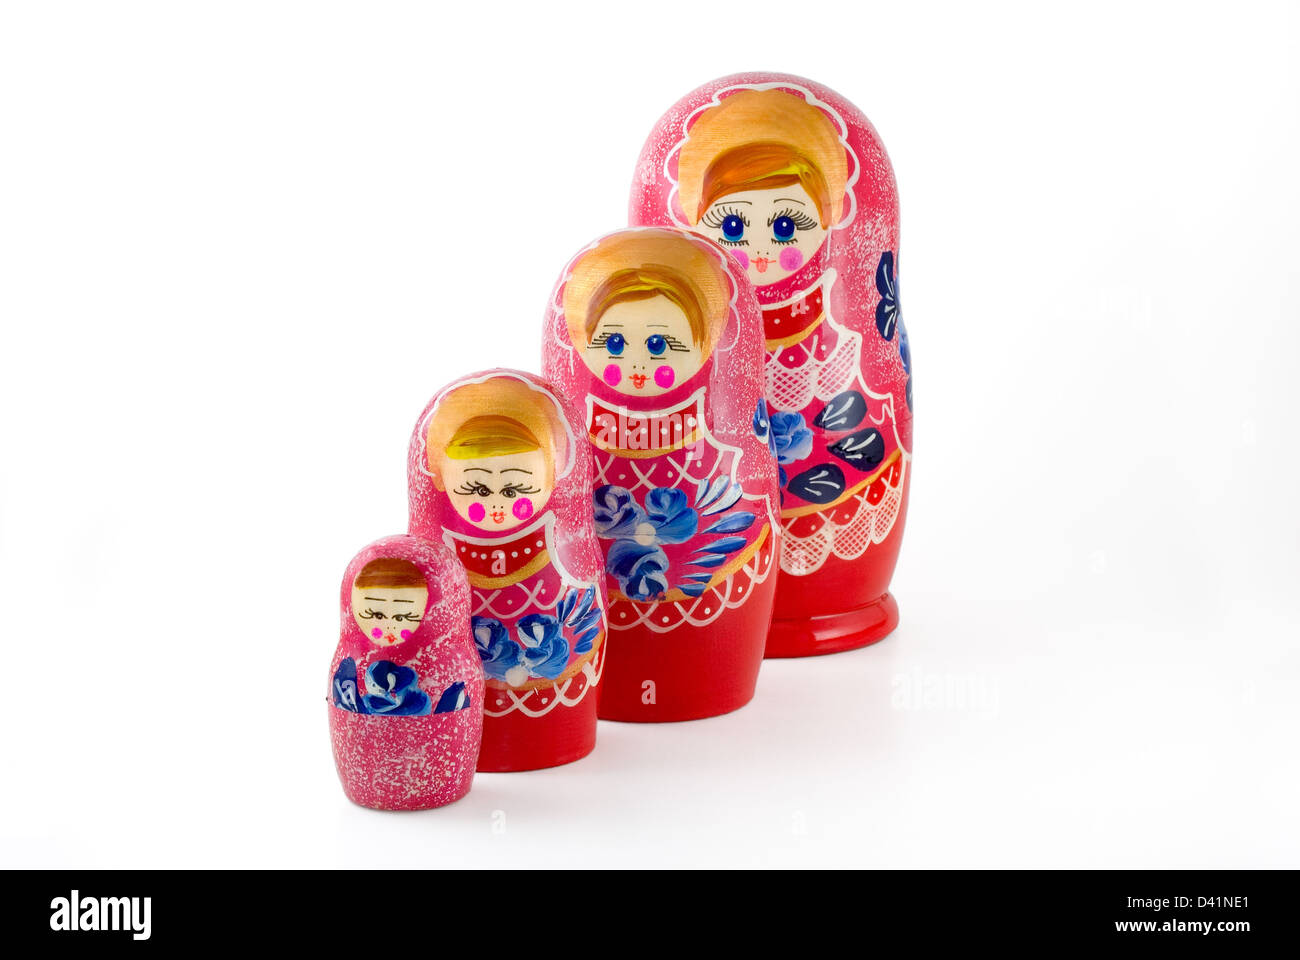 Russian nested dolls are photographed on white Stock Photo